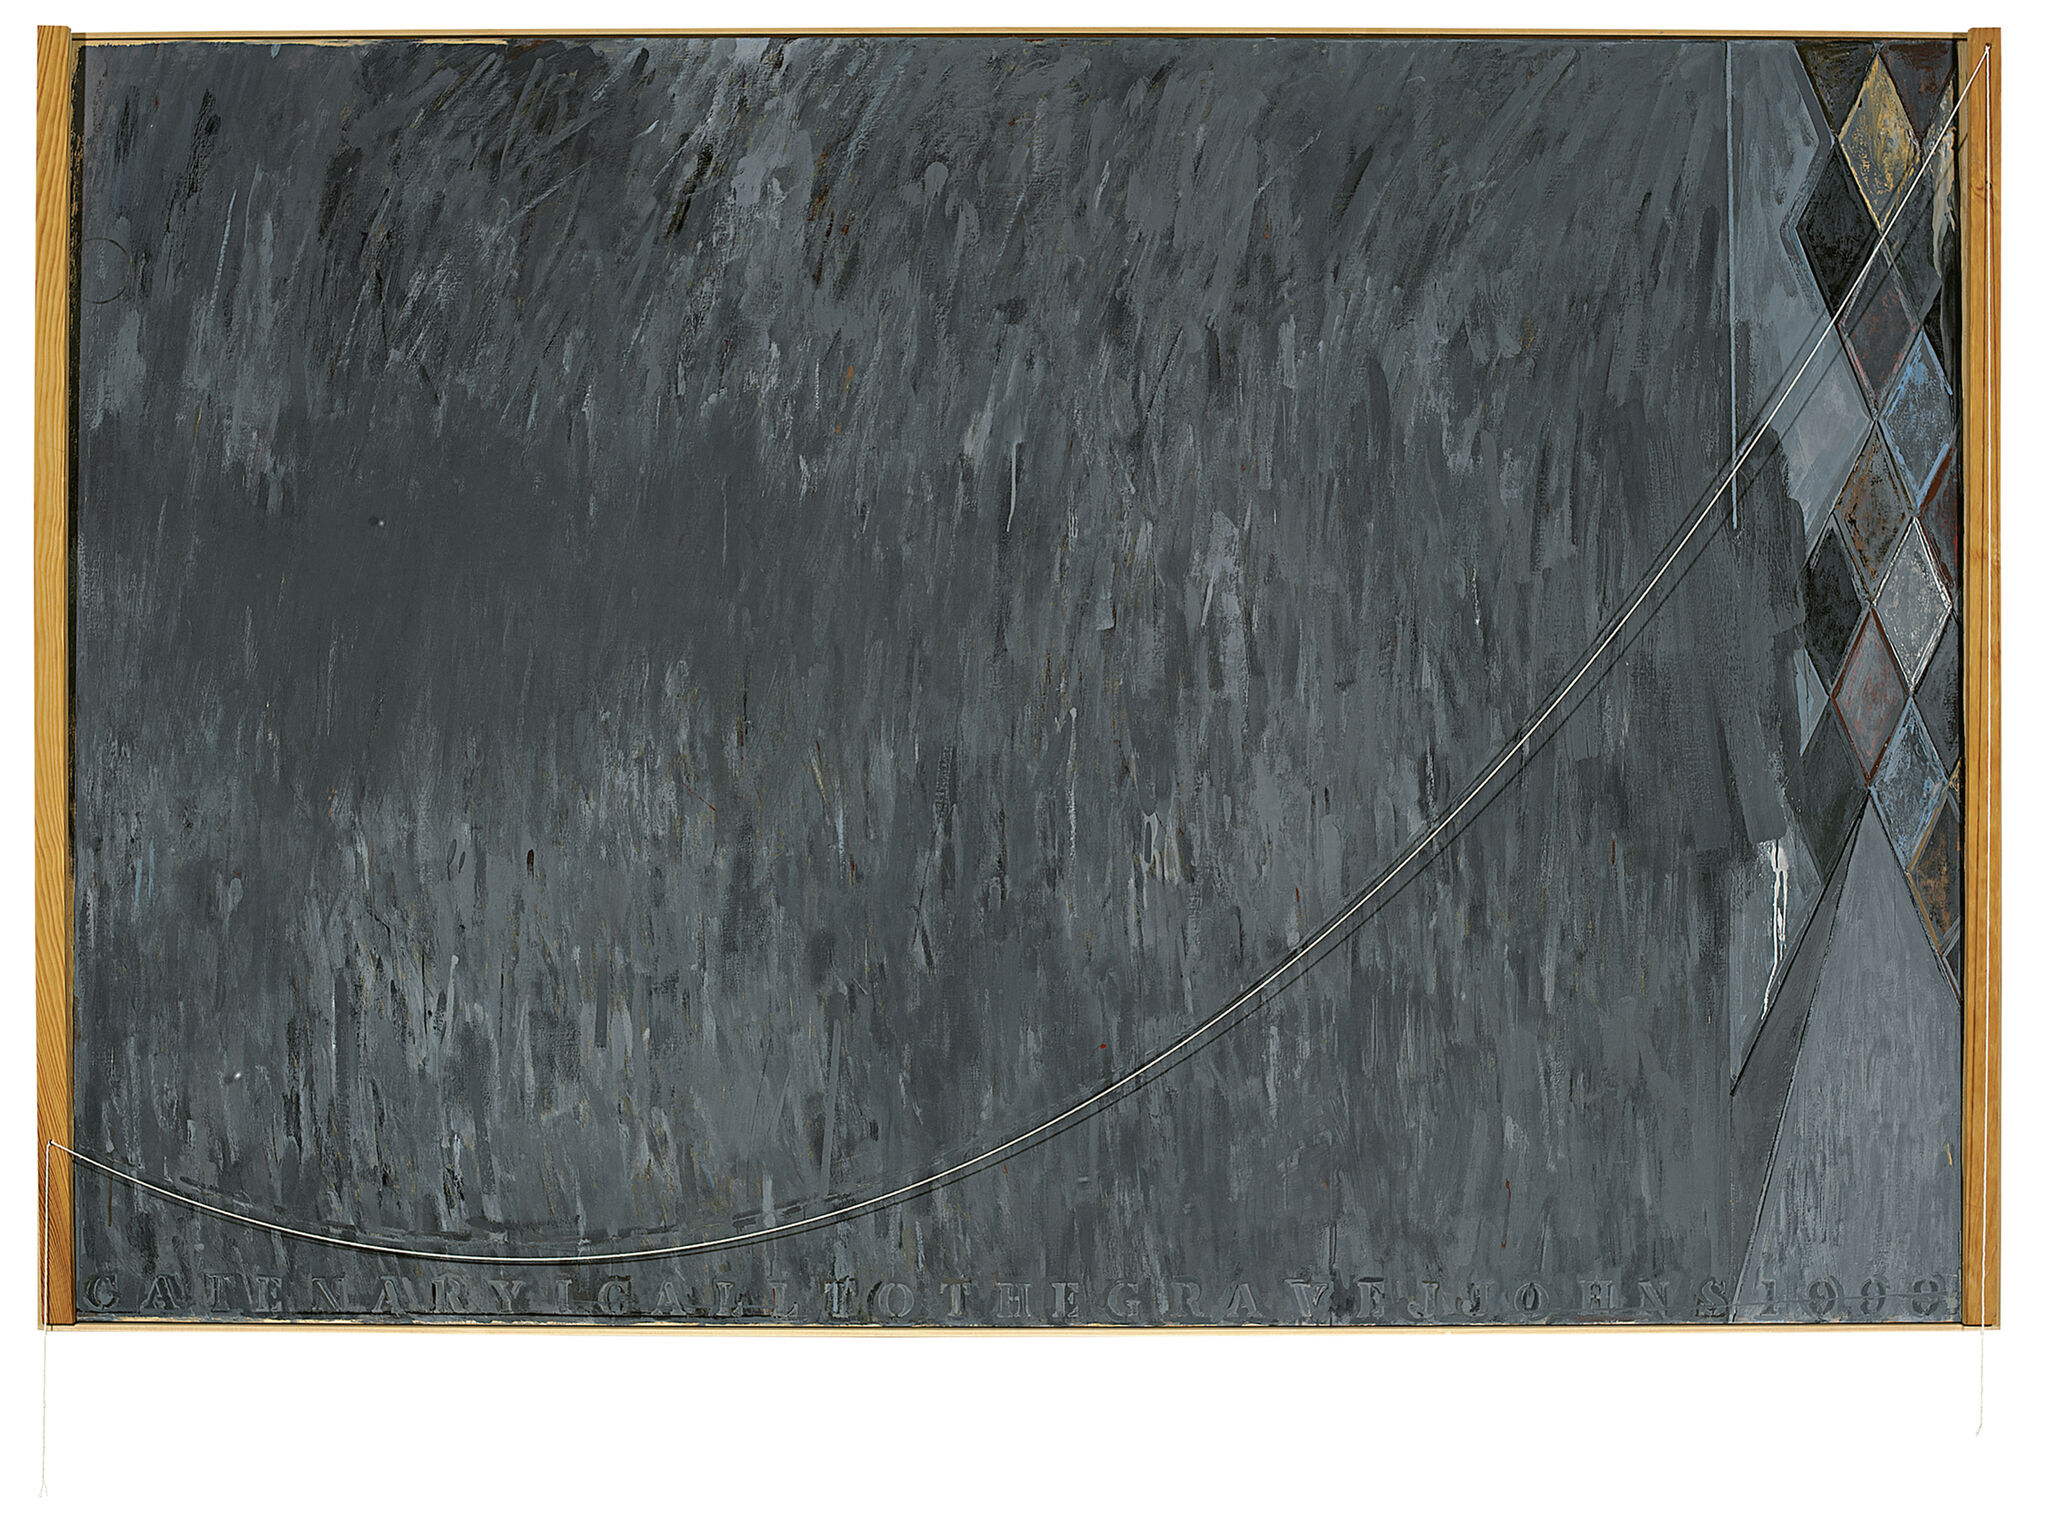 Wide rectangular composition of blue-gray brushstrokes, with a vertical band of a muted colorful diamond pattern running down most of the right-hand side; string pinned to the left and right sides of the frame and arcs across the composition from the lower left to the upper right corners.